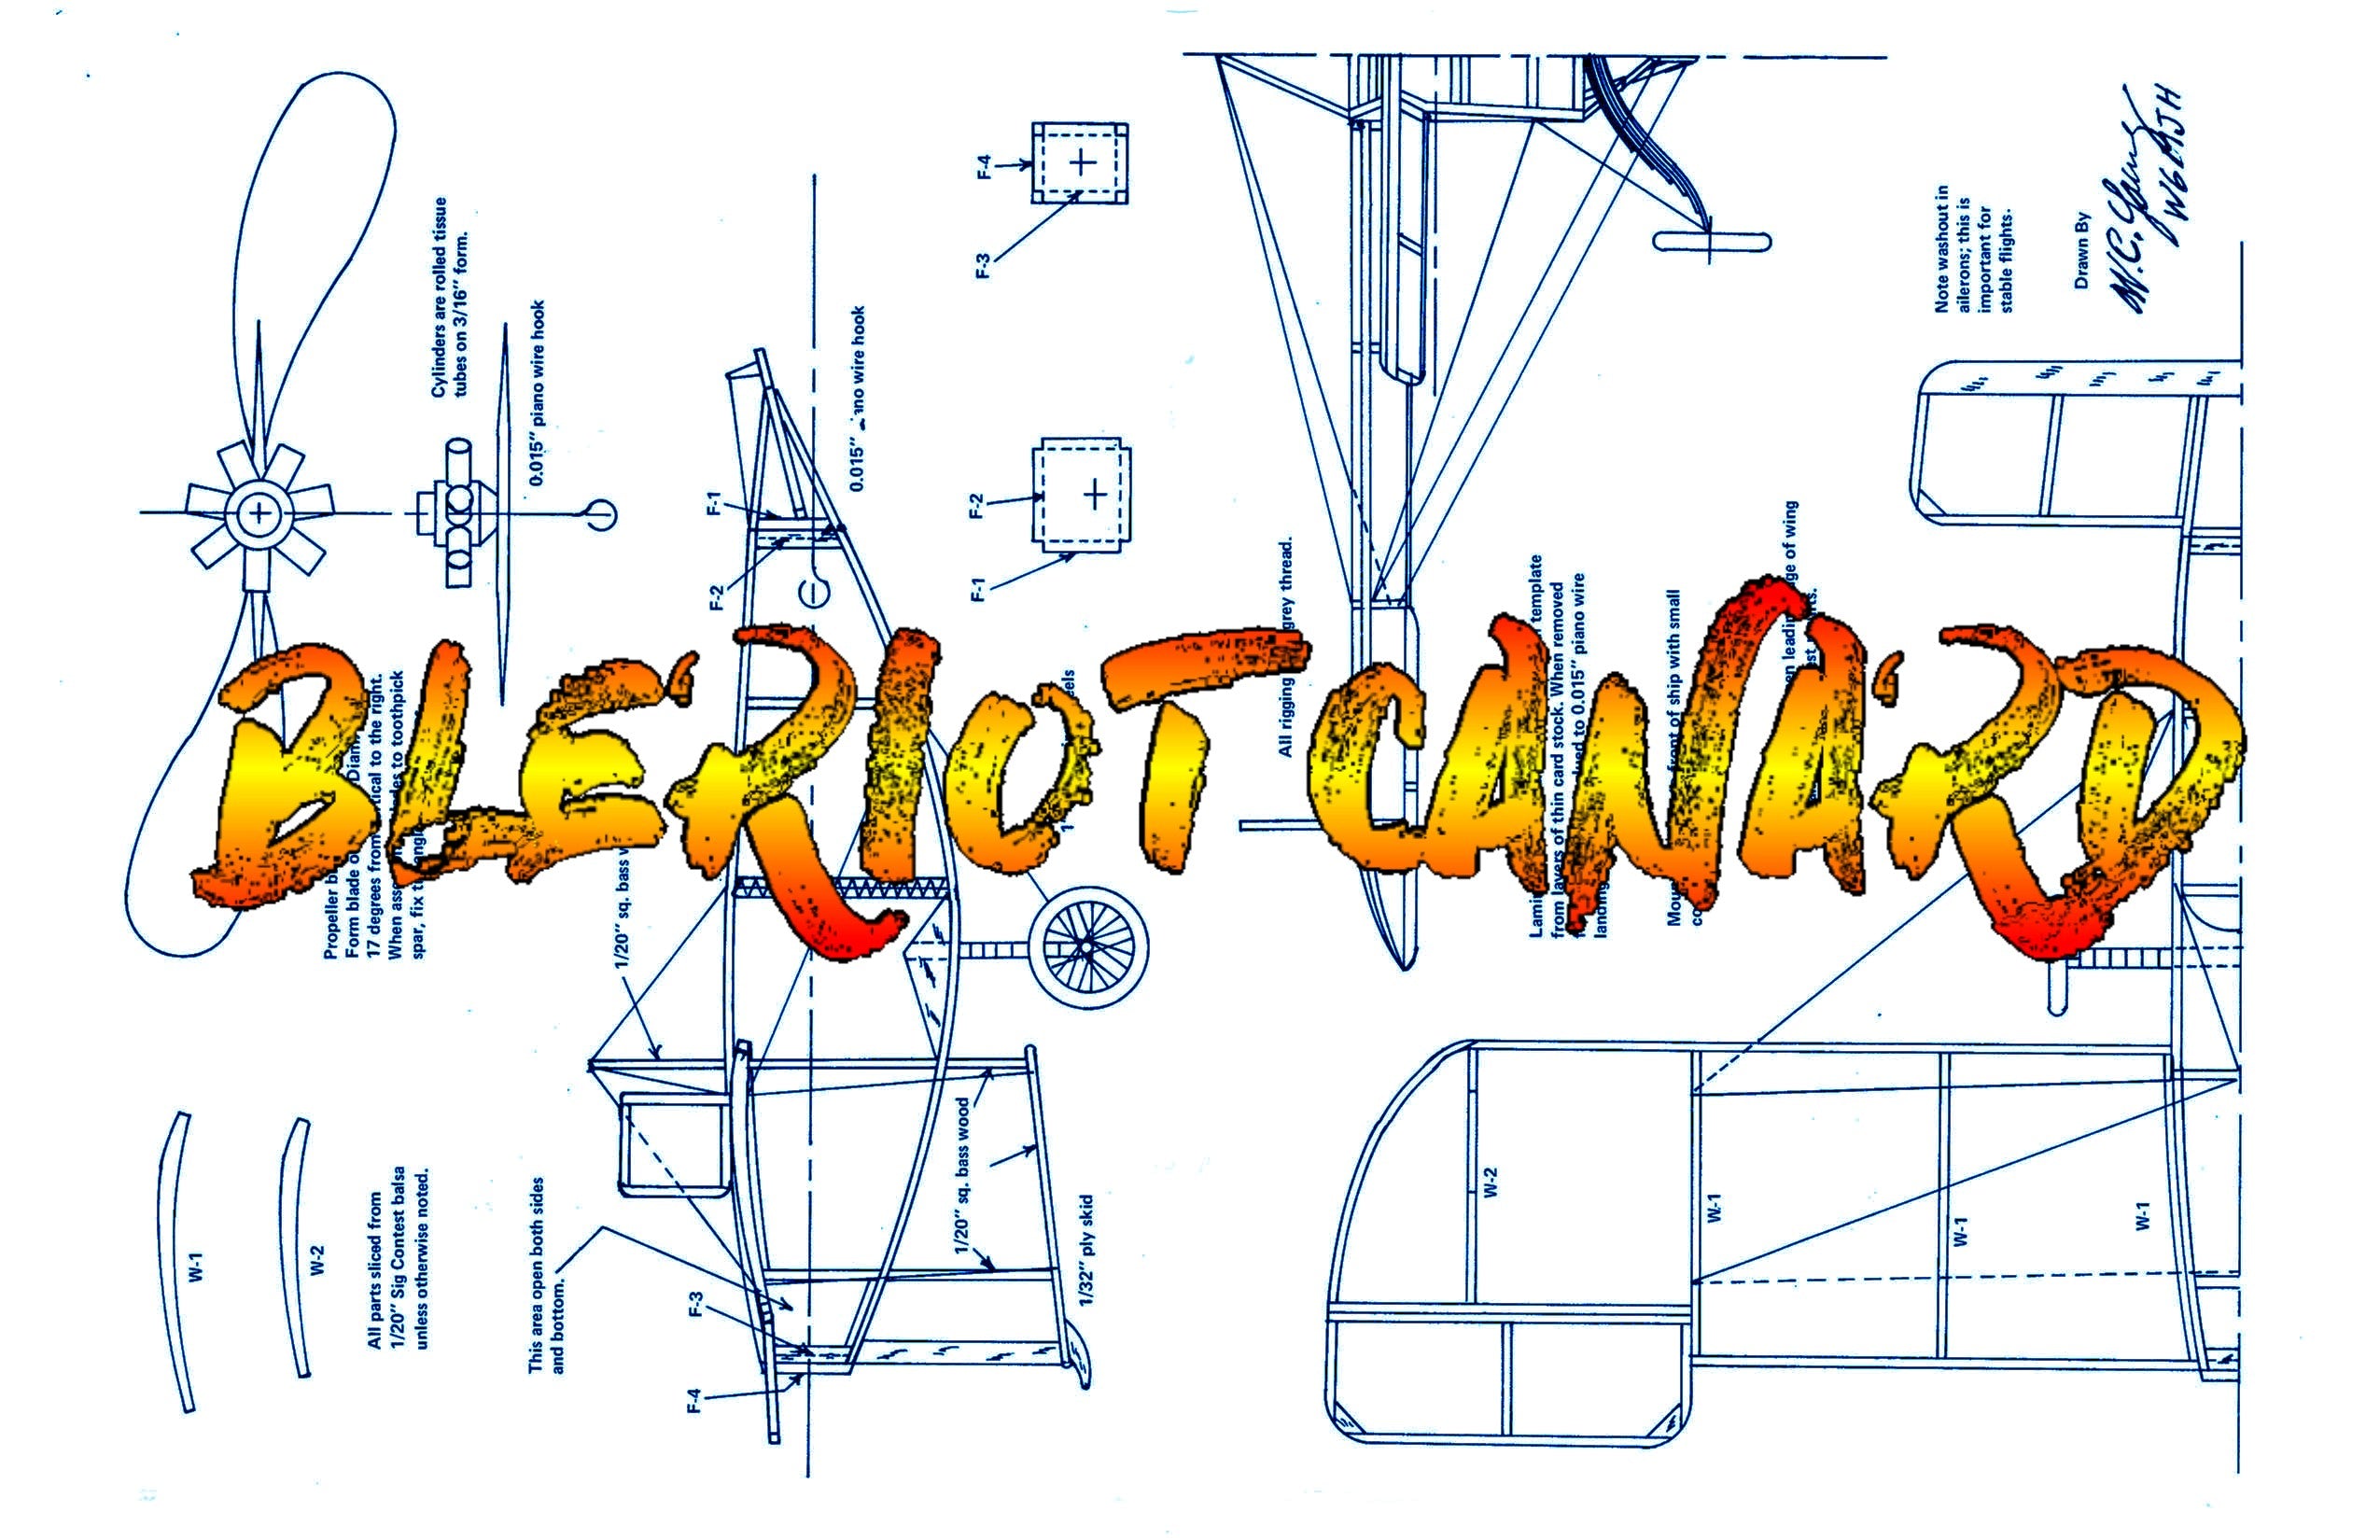 full size printed peanut scale plans bleriot canard  little unusual, it is also a contest winning flier